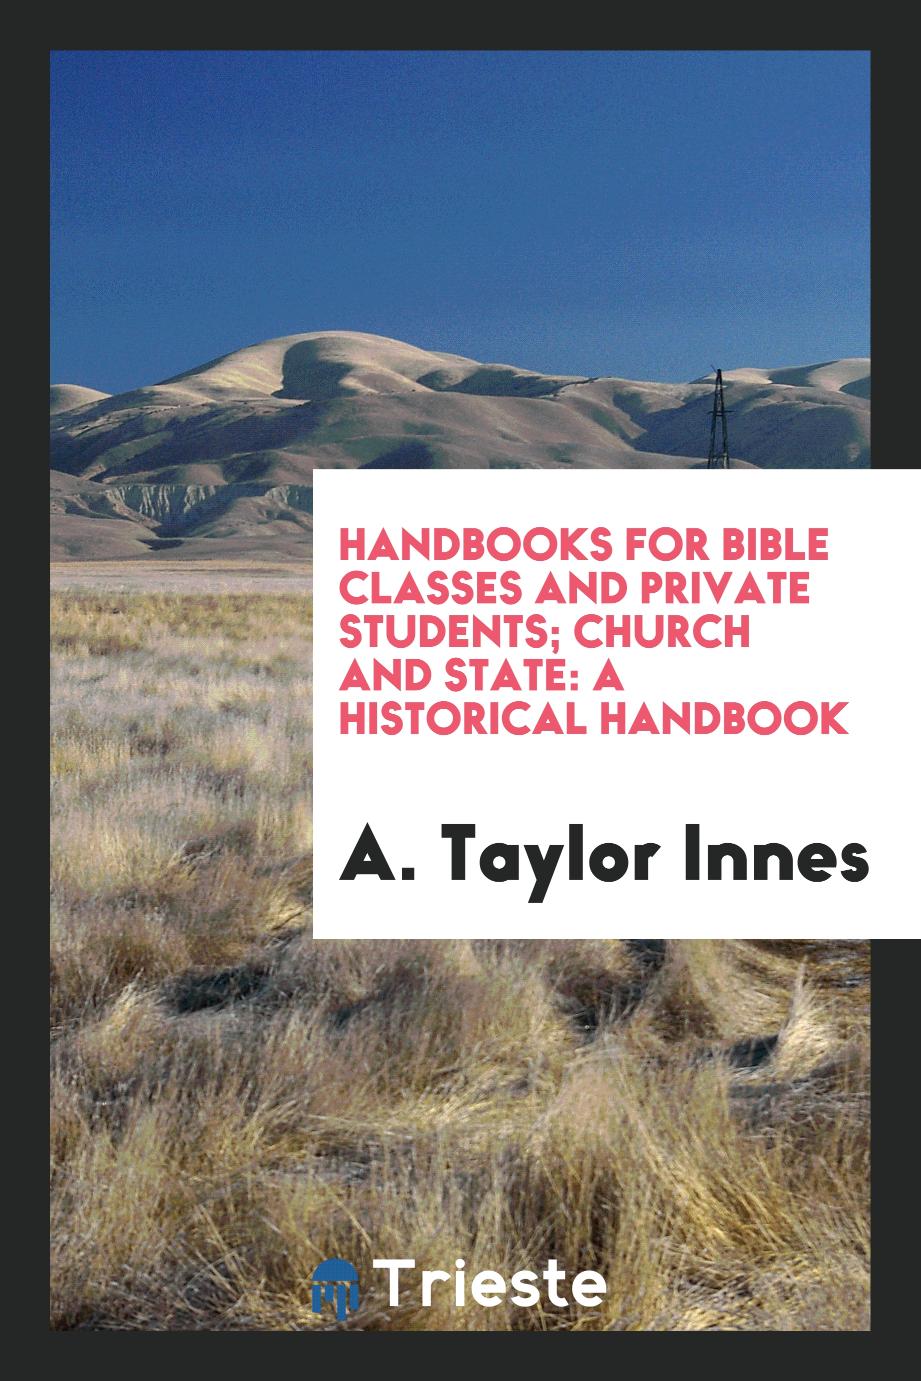 Handbooks for bible classes and private students; Church and state: a historical handbook